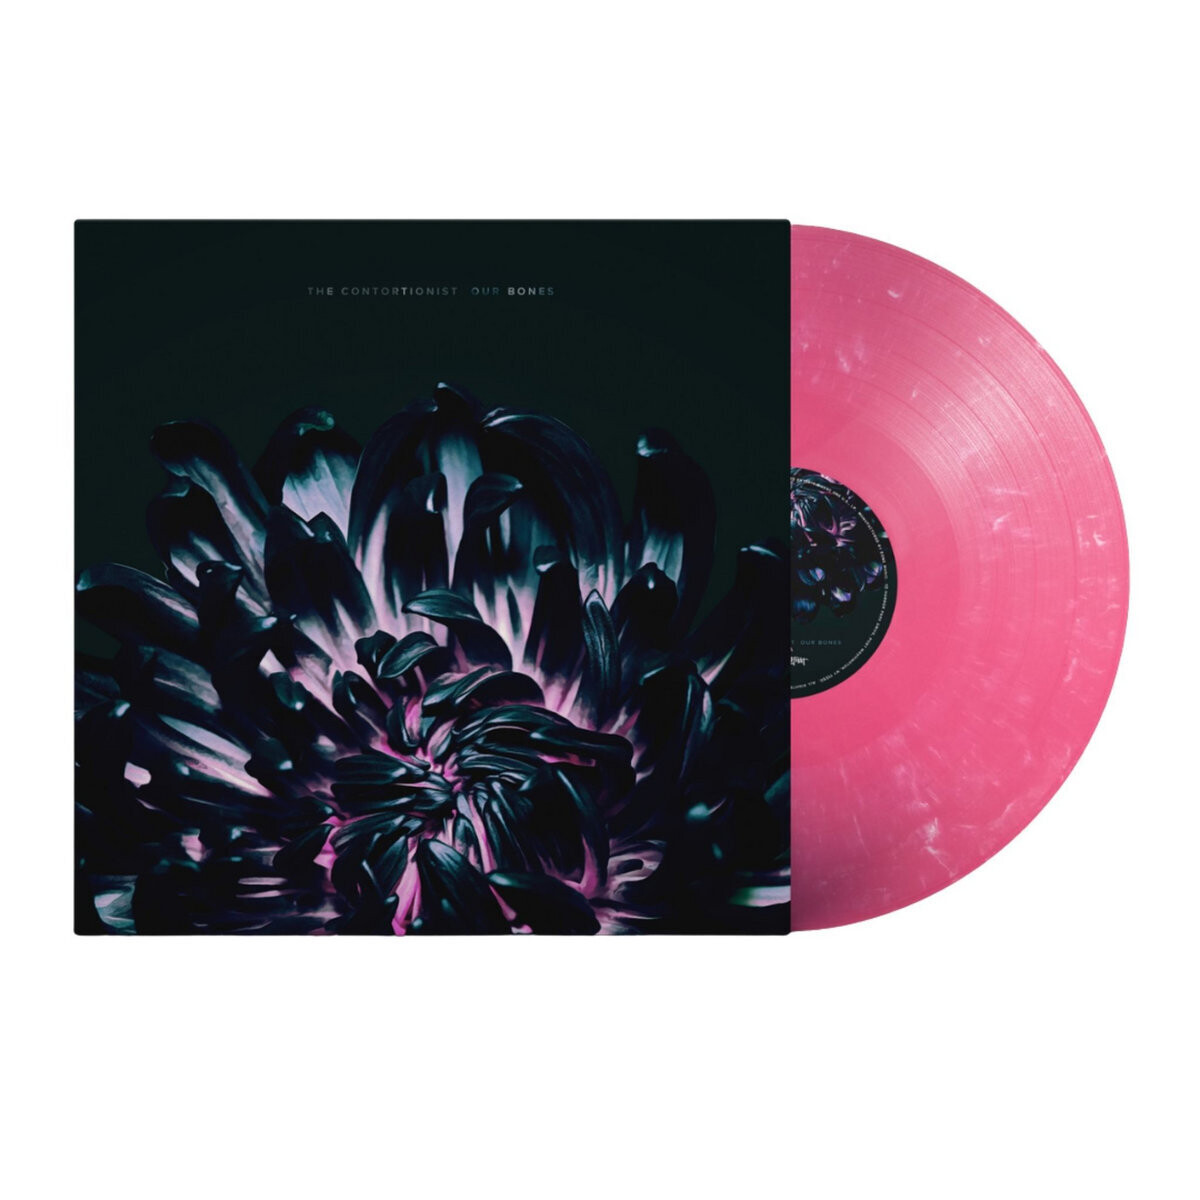 The Contortionist - Our Bones (180g pink/white marble)